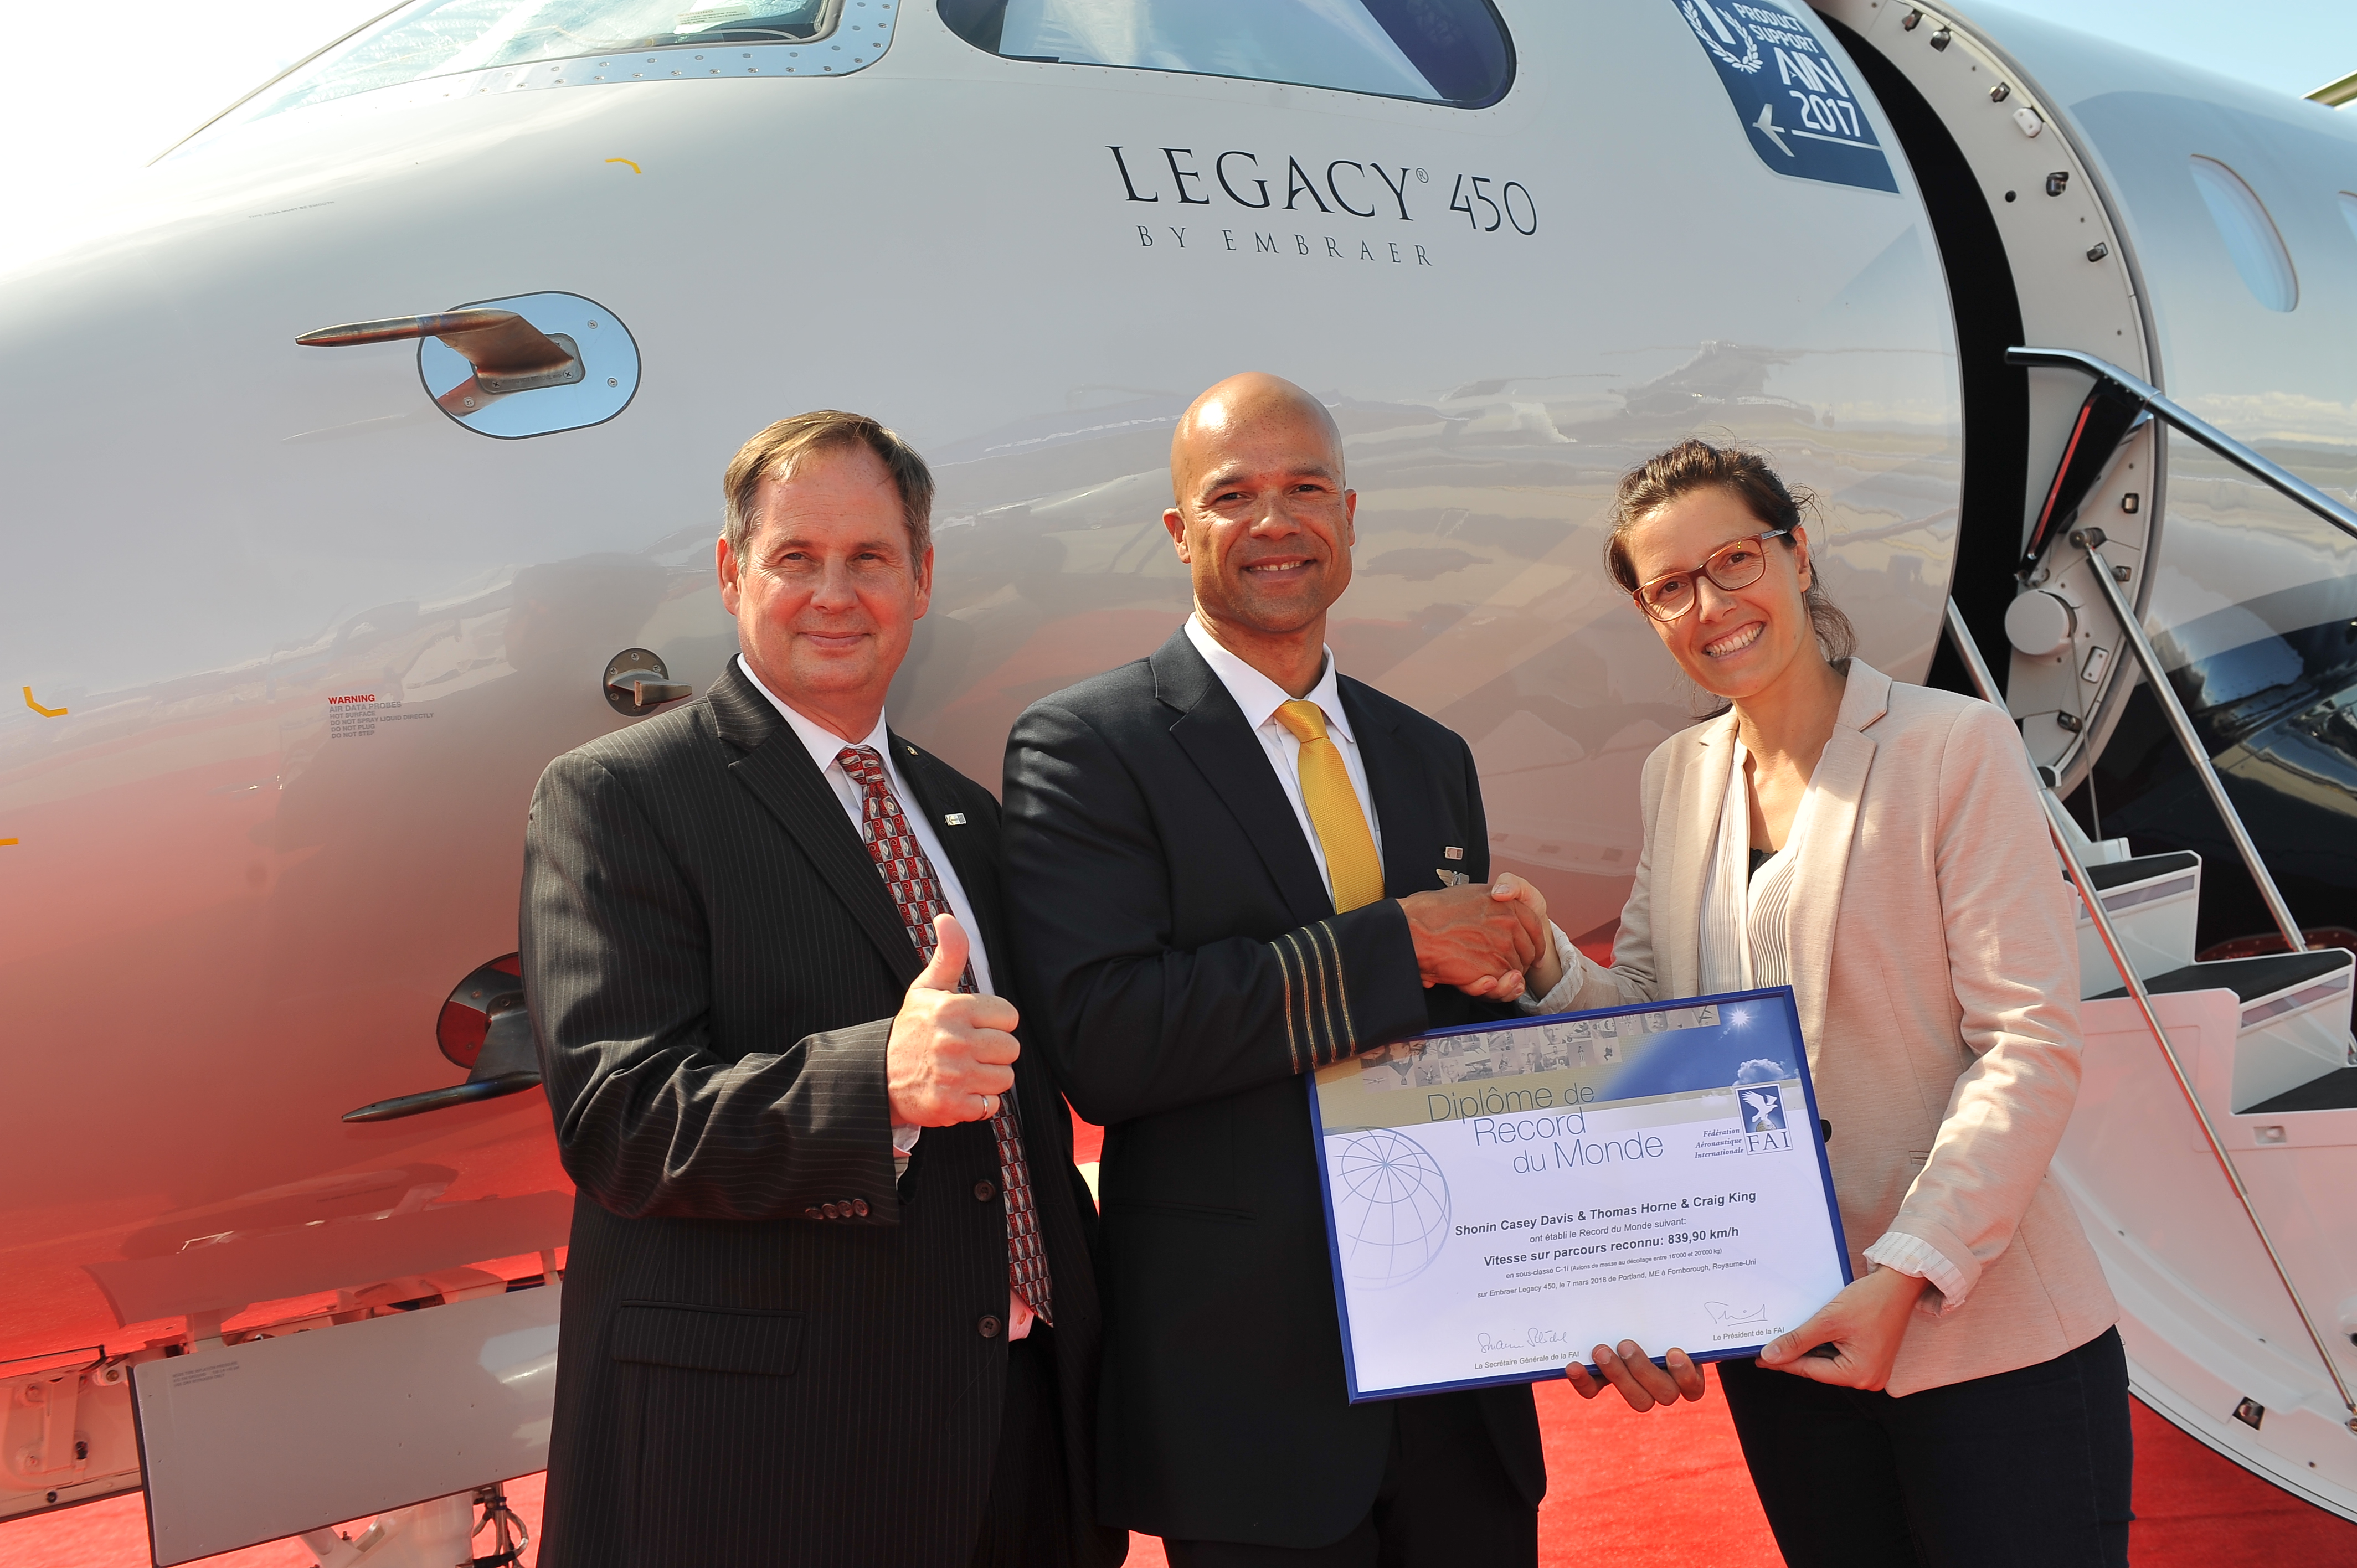 Embraer Legacy 450 Sets Transatlantic Speed Record between the United States and Europe | The JetAv Blog